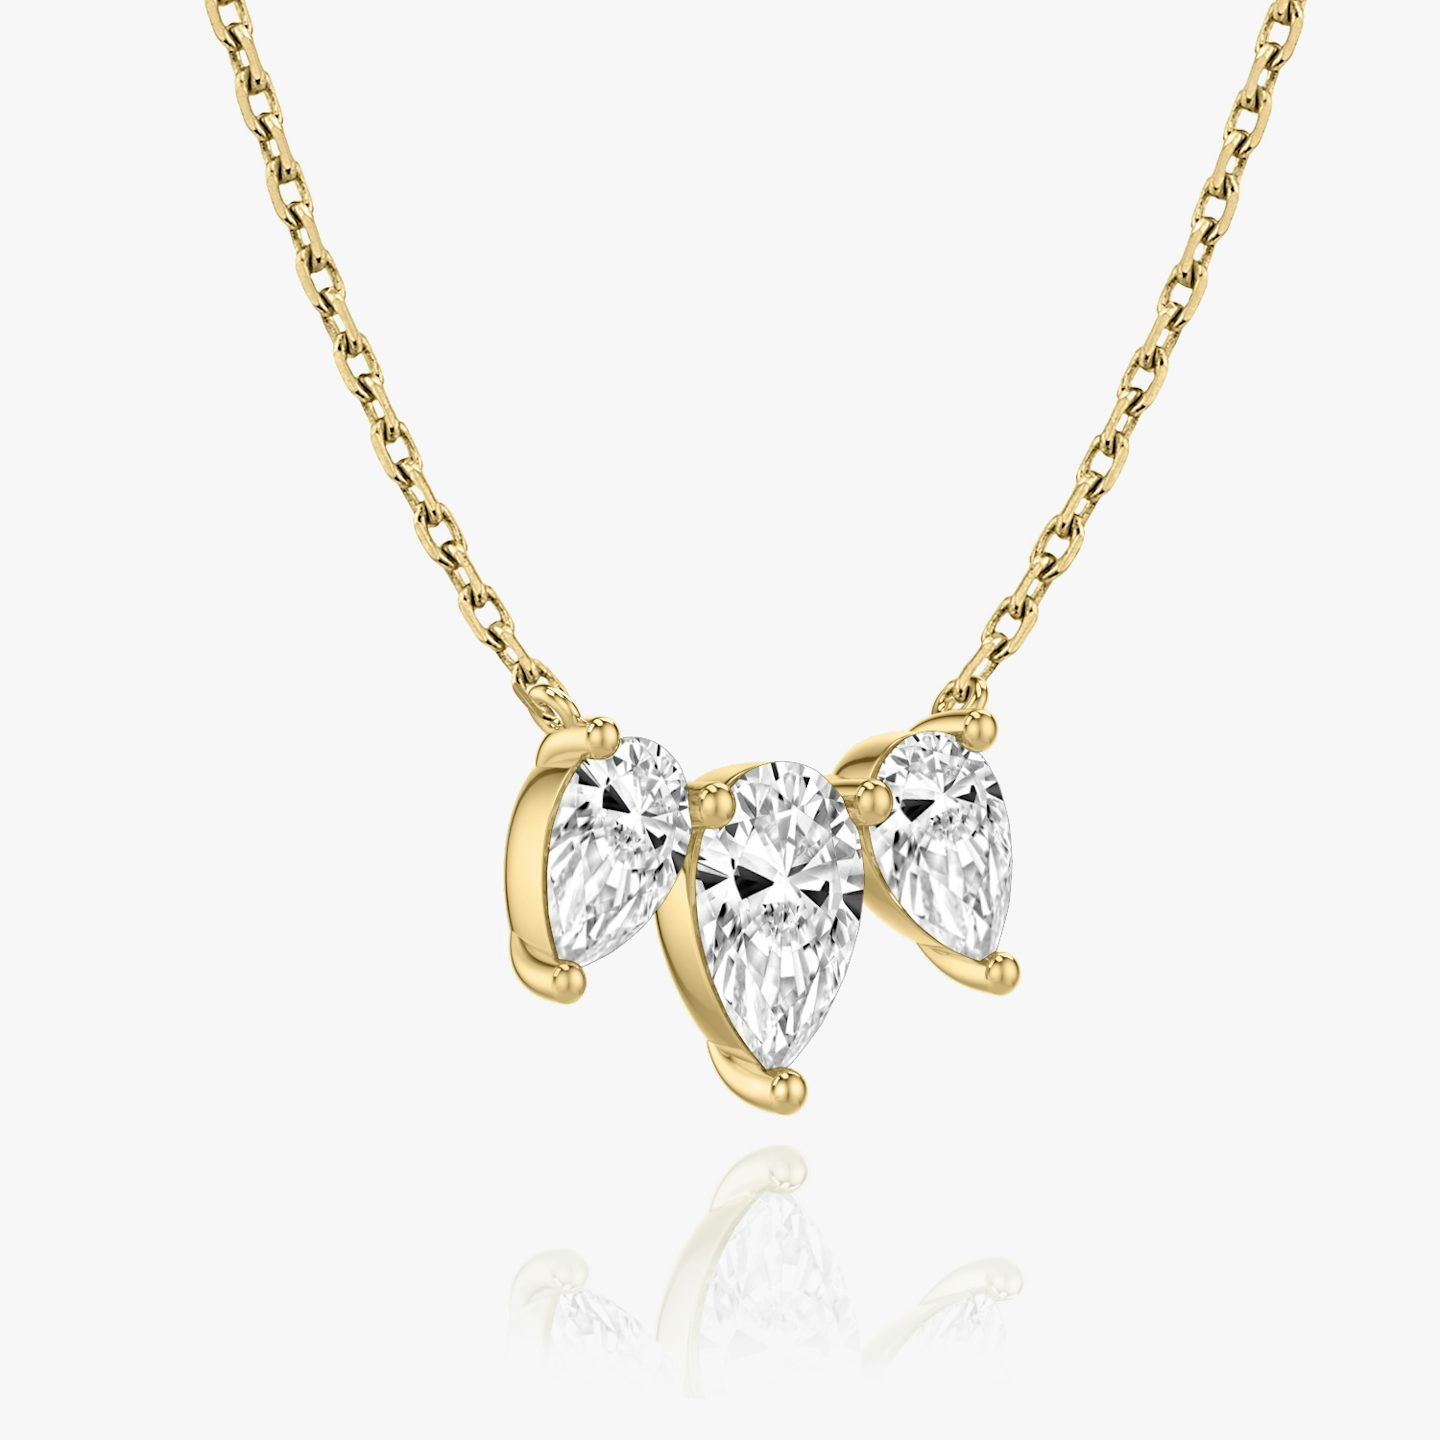 Arc Necklace | Pear | 14k | 18k Yellow Gold | Chain length: 16-18 | Diamond size: Large | Diamond count: 3